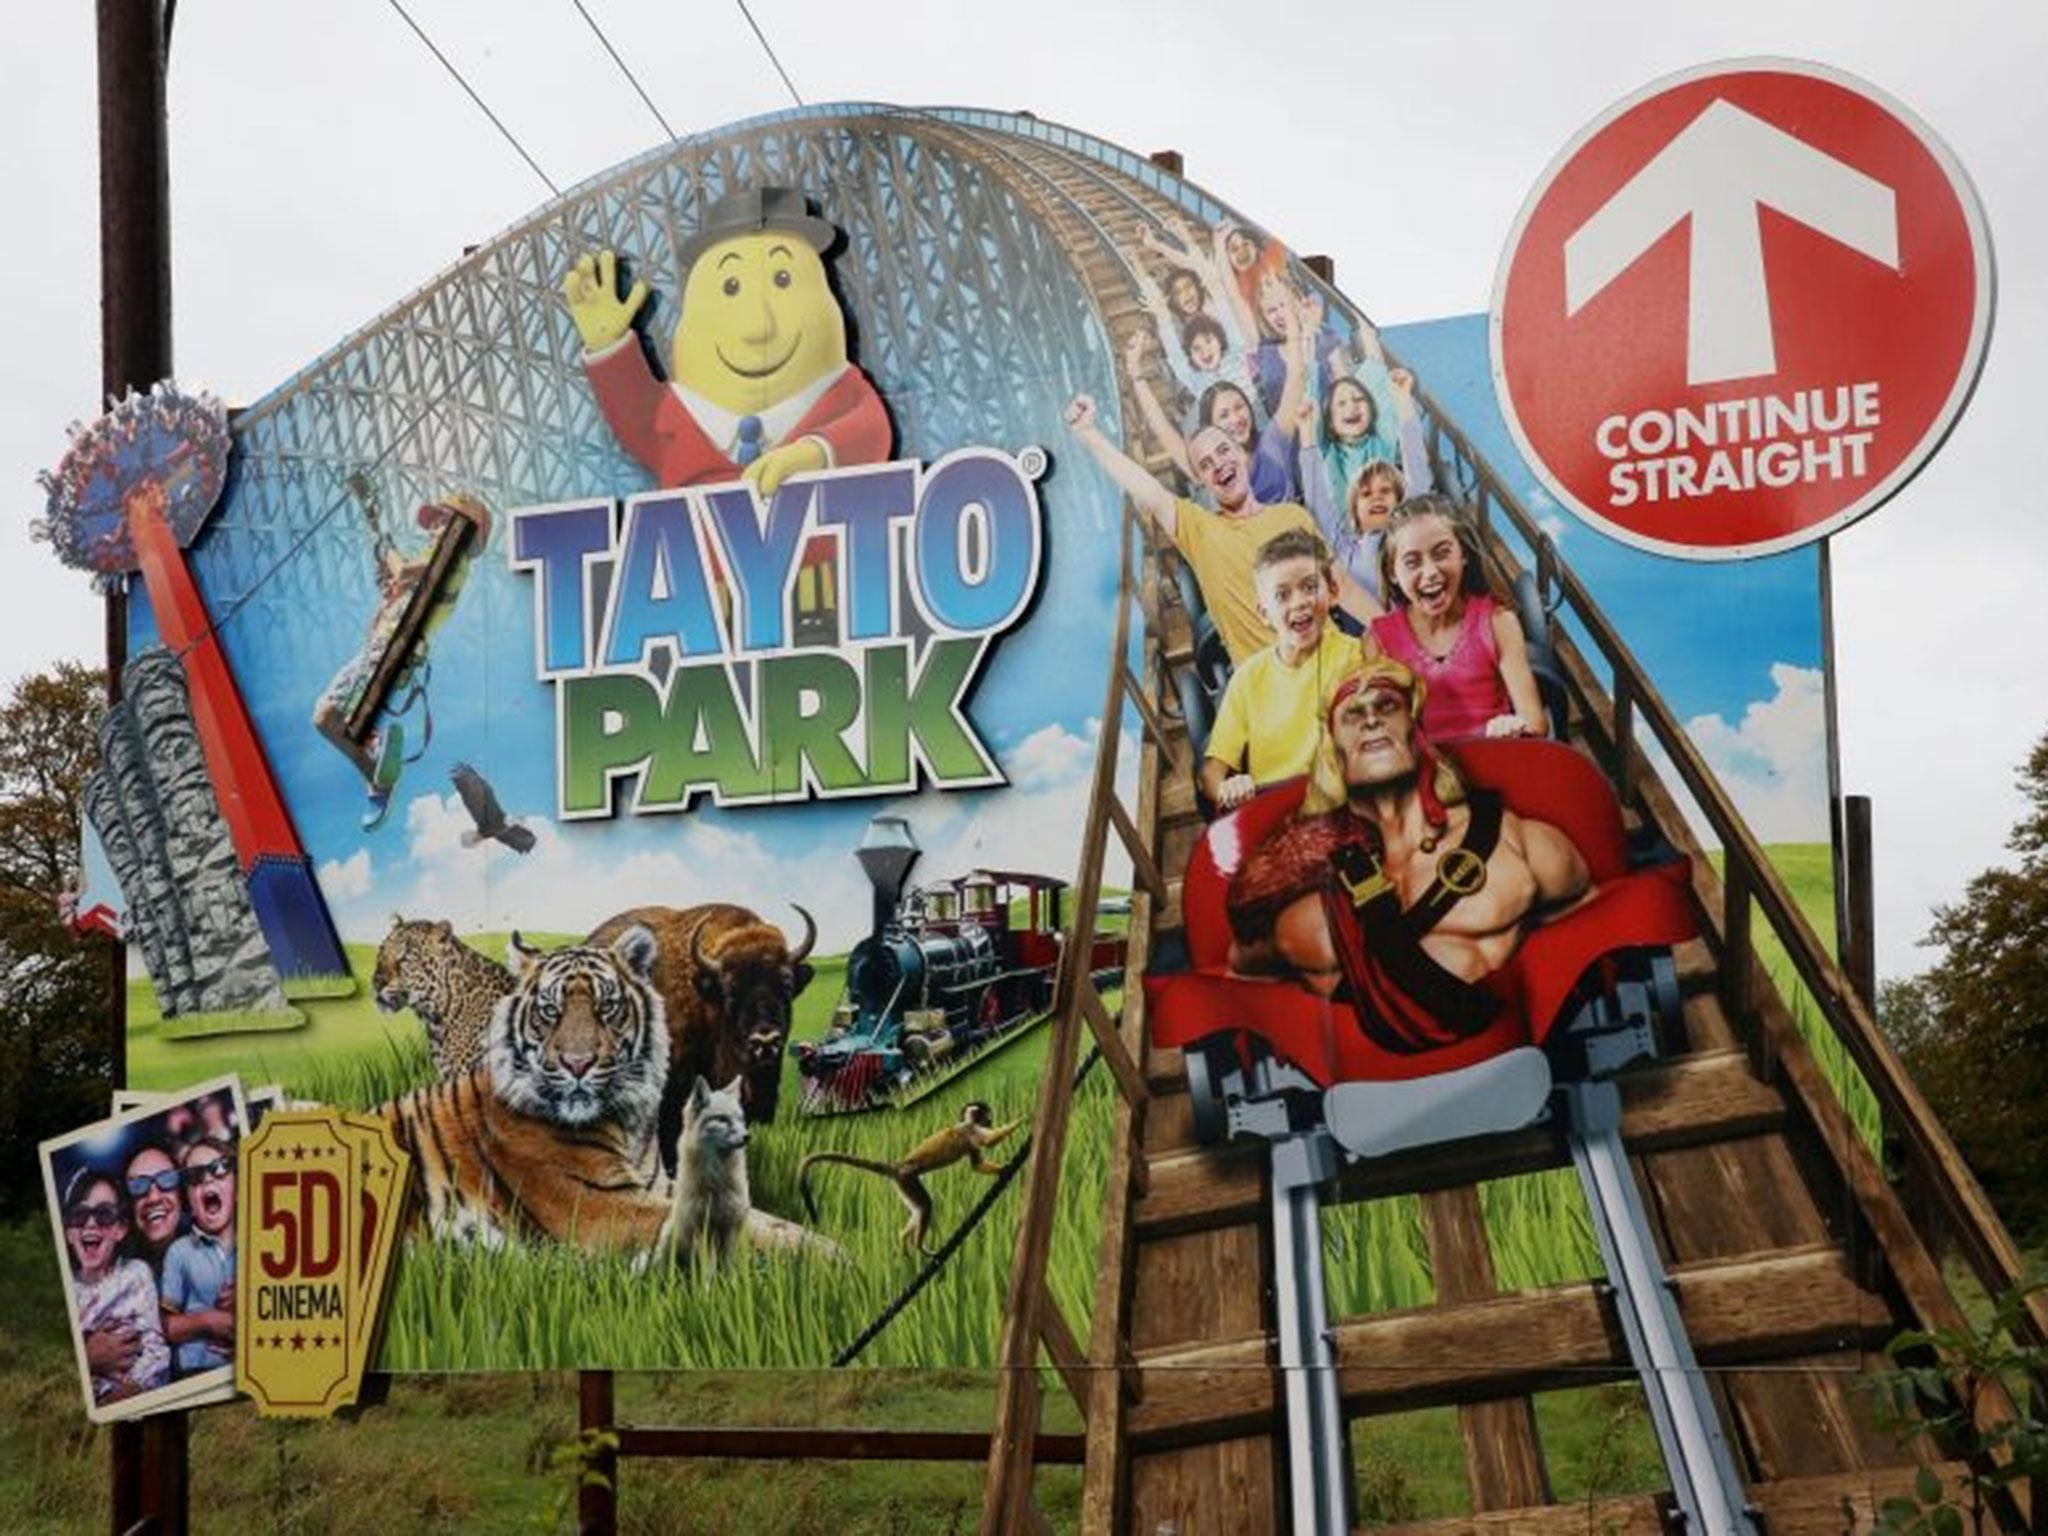 Nine people were taken to hospital when stairs collapsed at Tayto Park in Ireland